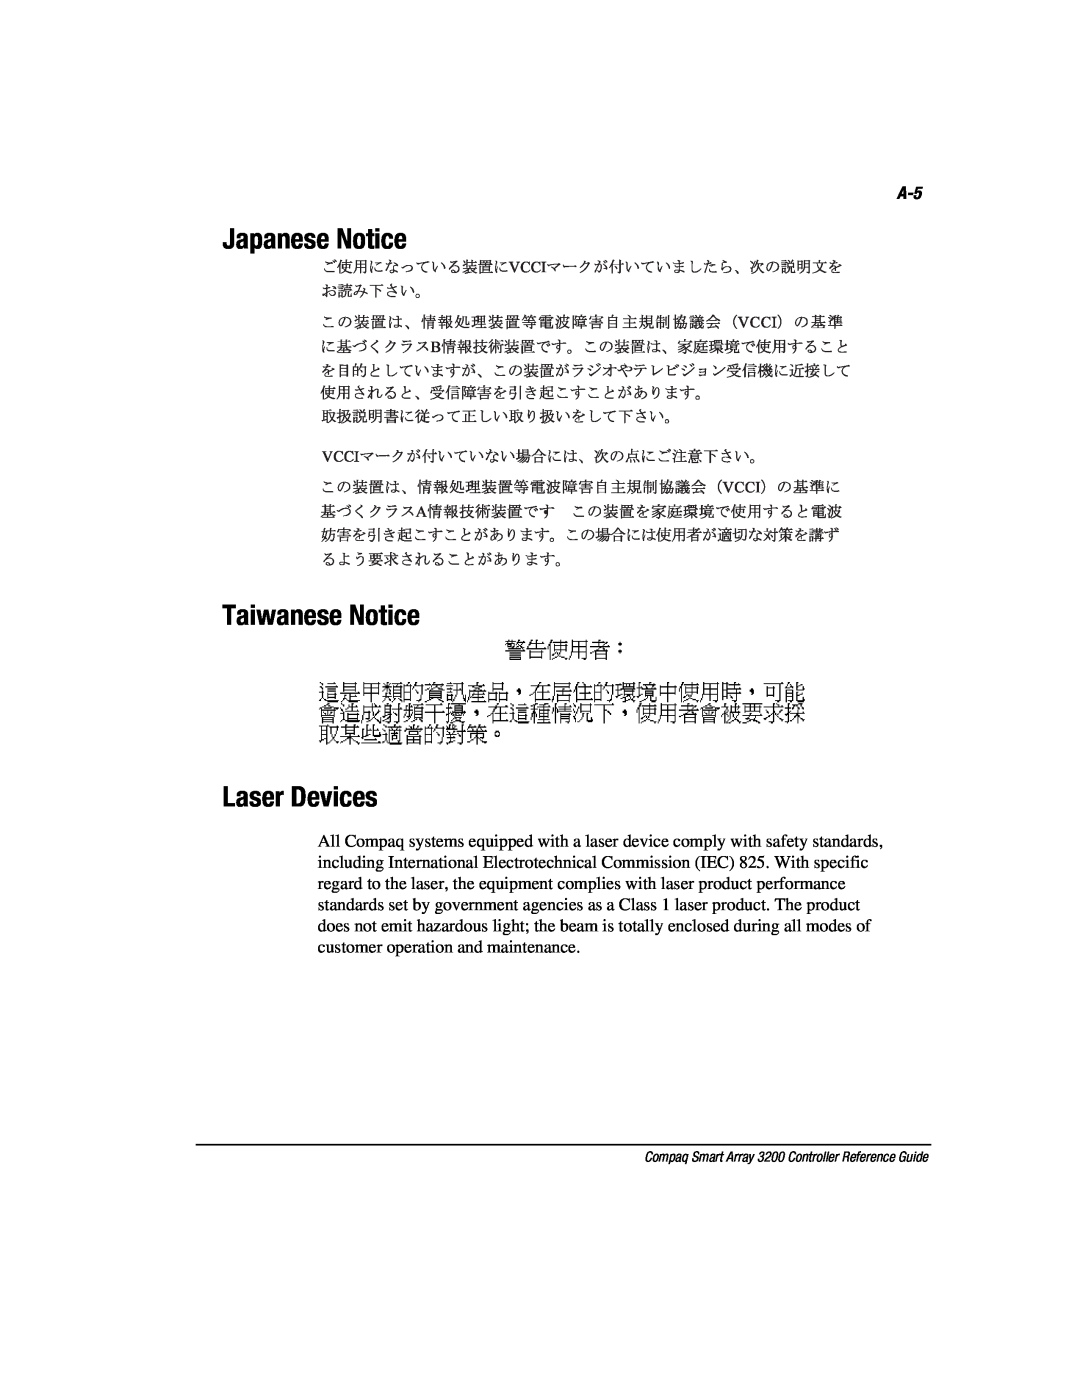 Compaq 3200 manual Japanese Notice Taiwanese Notice Laser Devices 